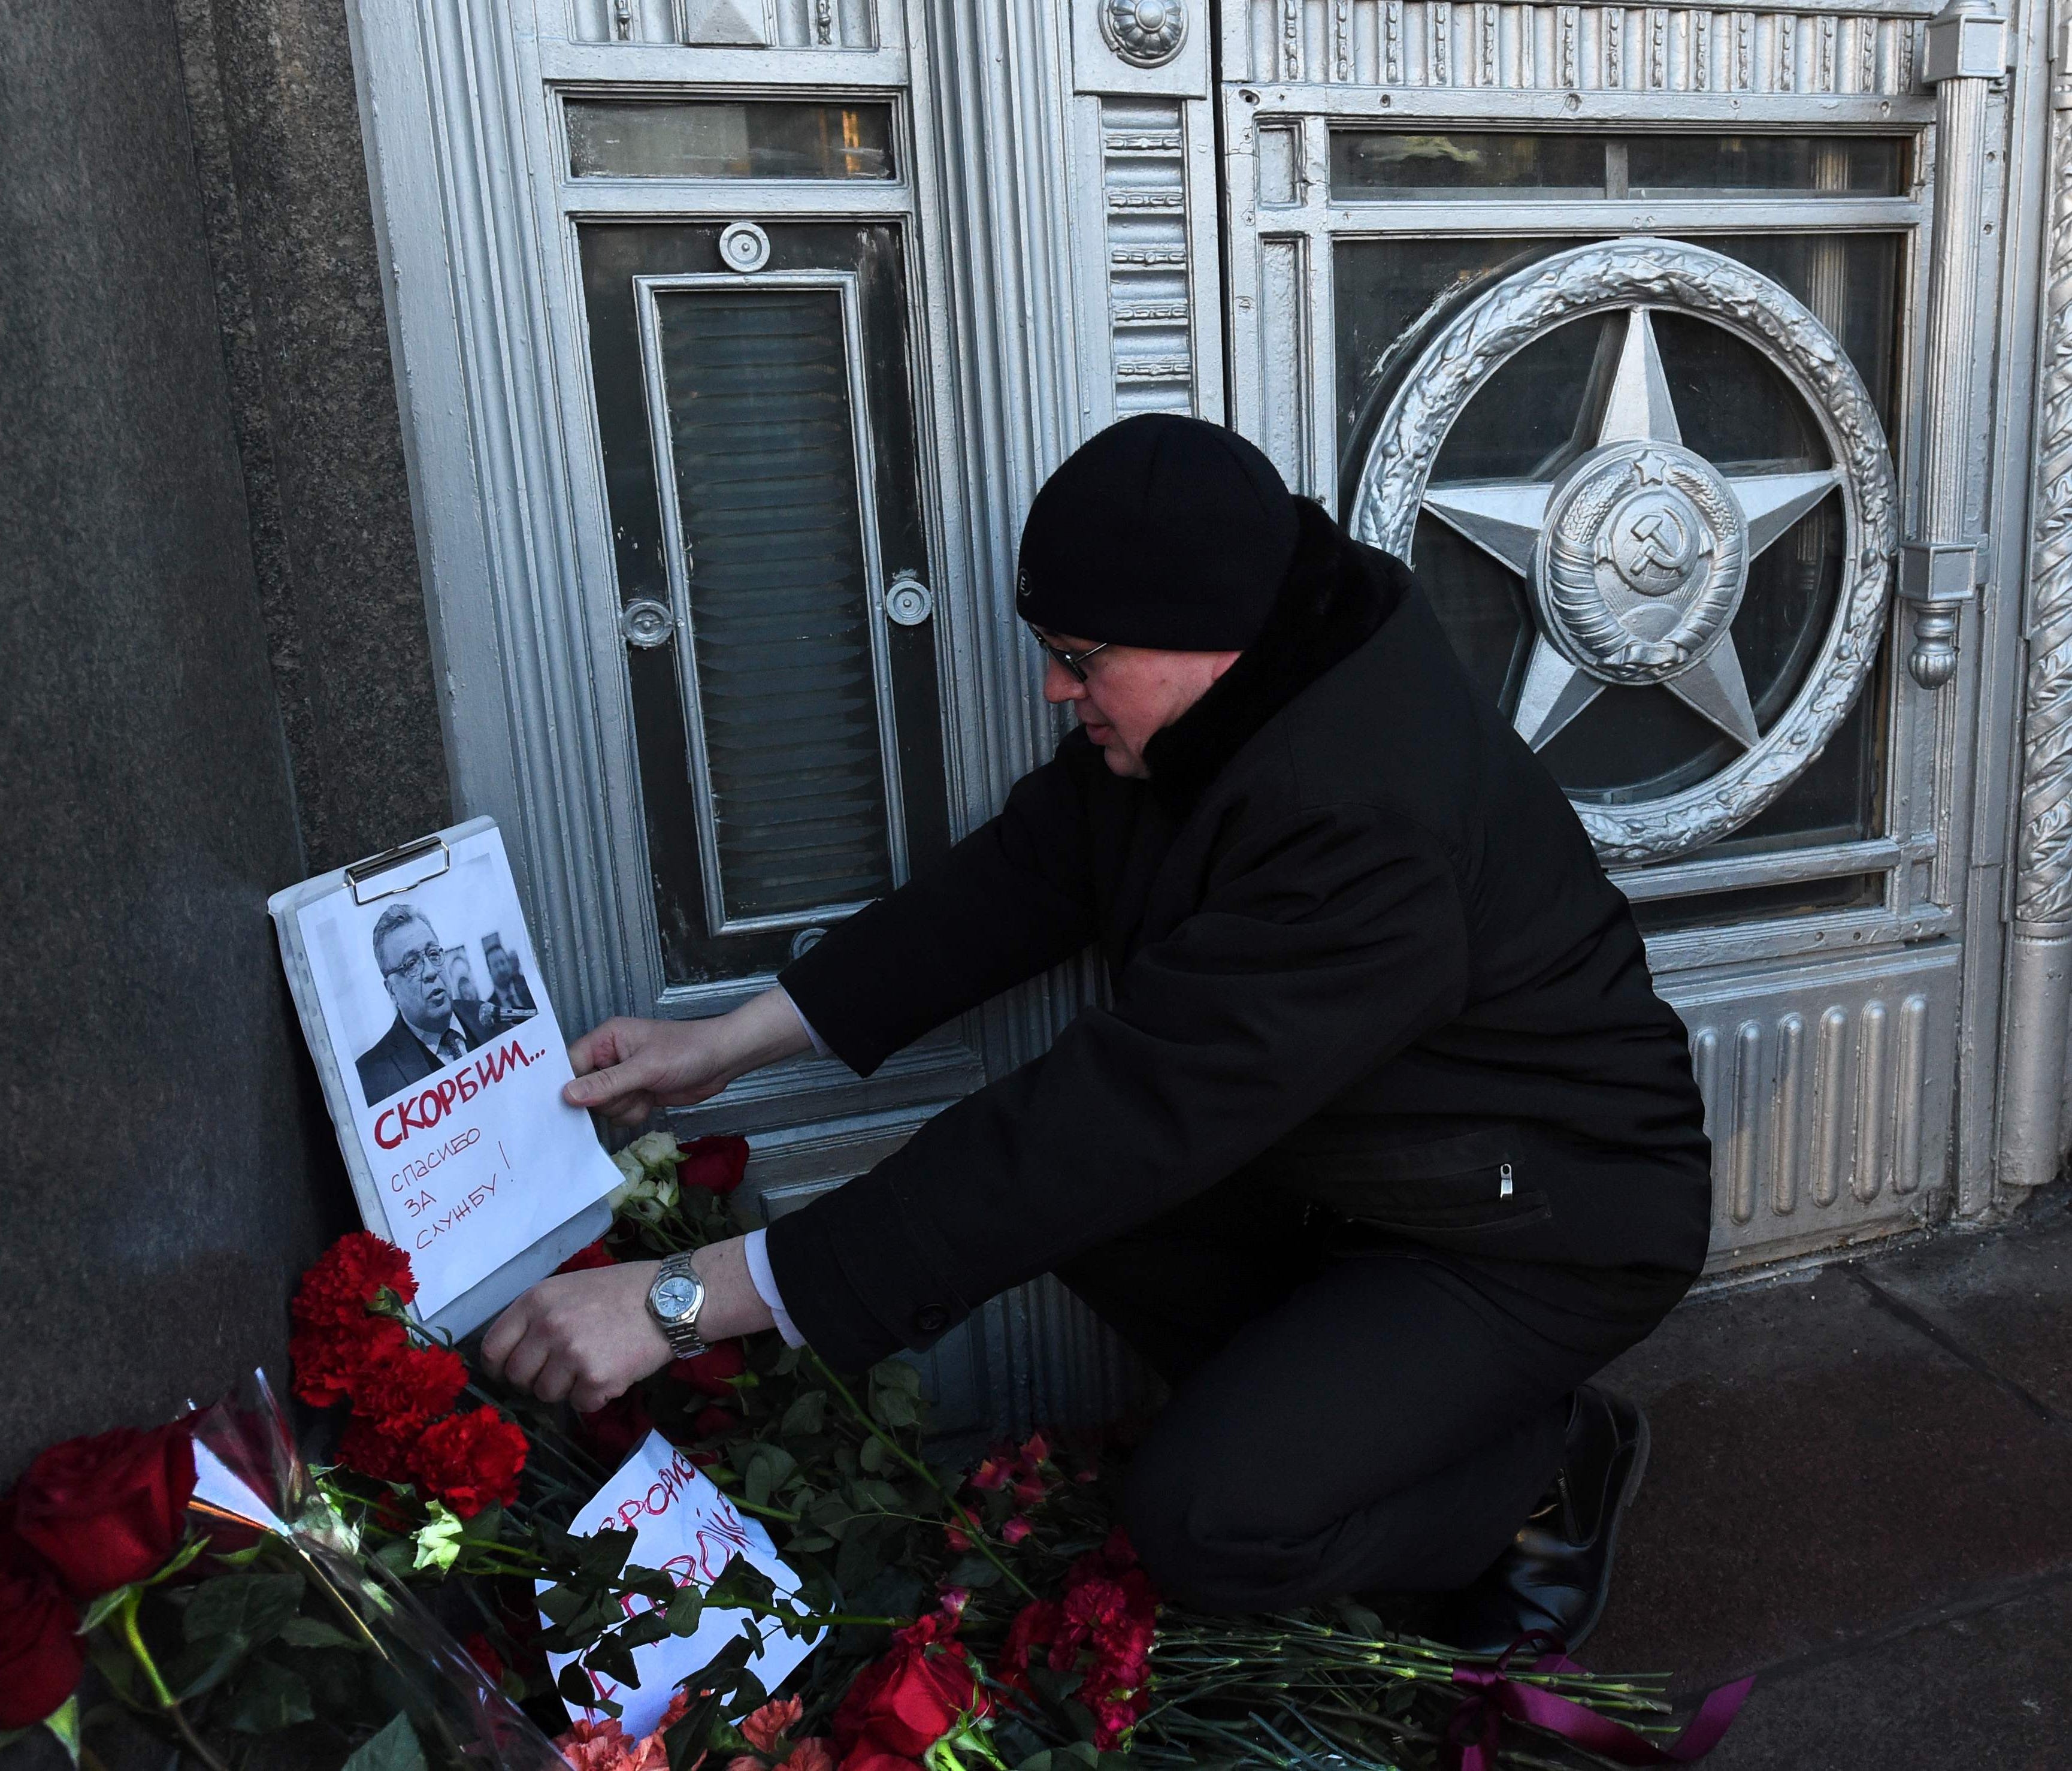 A man touches a picture of Russia's ambassador to Turkey at the Russian Foreign Ministry in Moscow on December 20, 2016, a day after his assassination in Ankara.